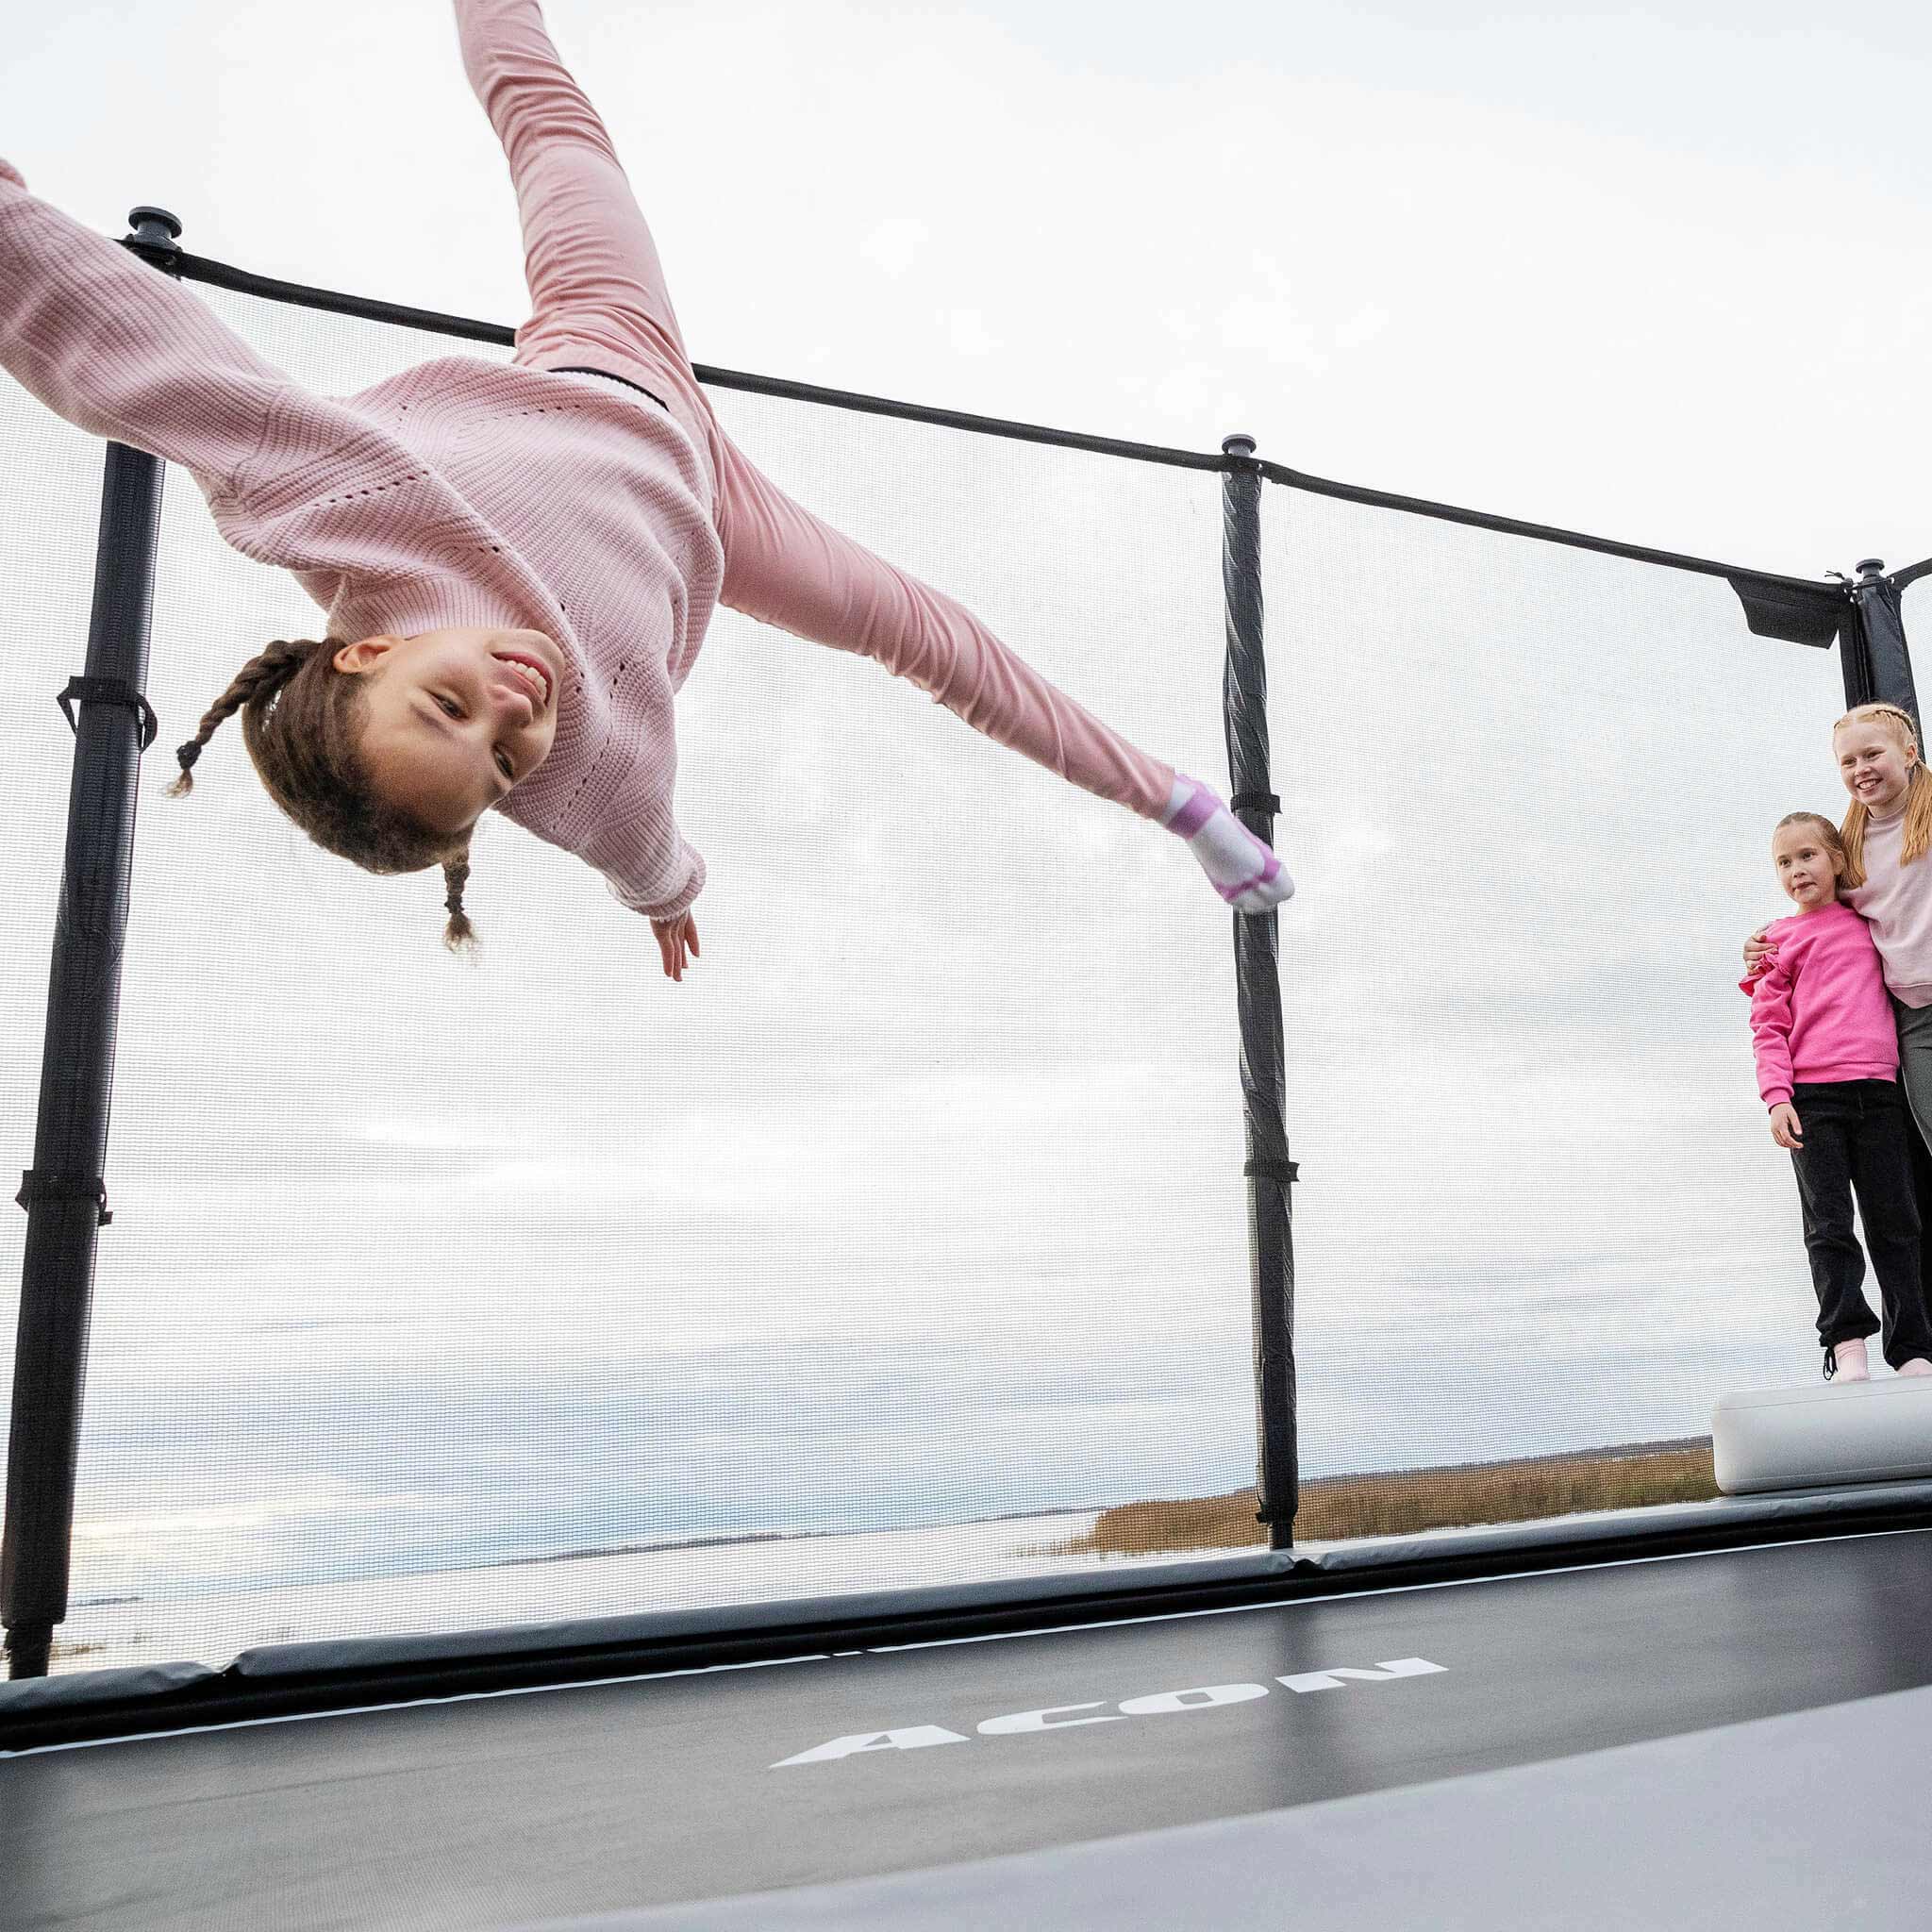 A girl jumps on the Acon X Trampoline, two girls stand and watch.